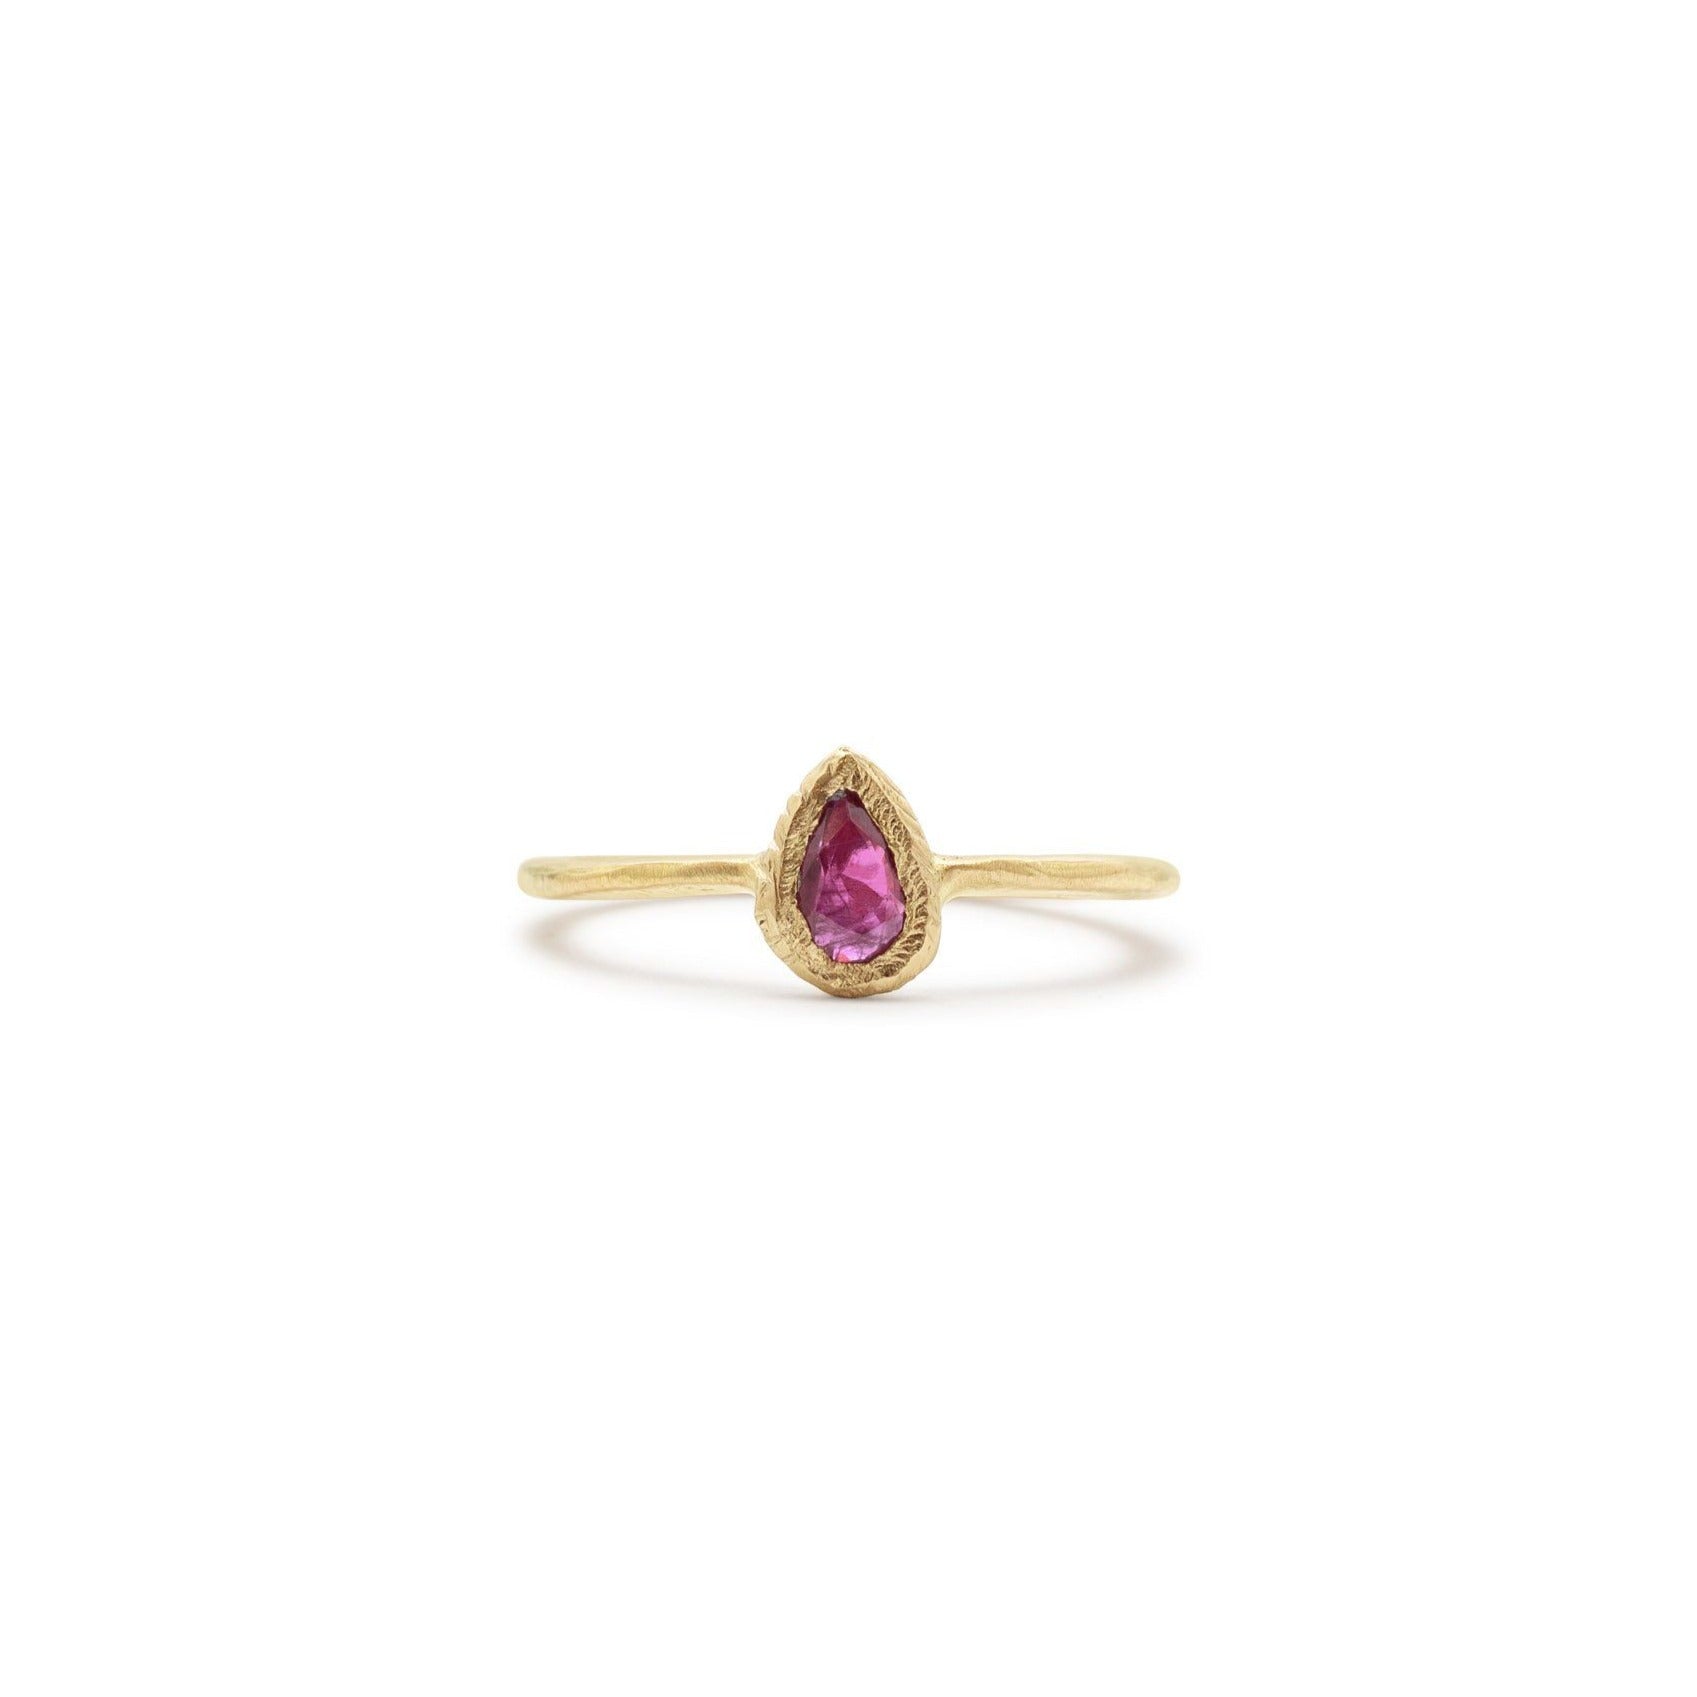 Handmade pear shaped ruby ring in 18kt gold